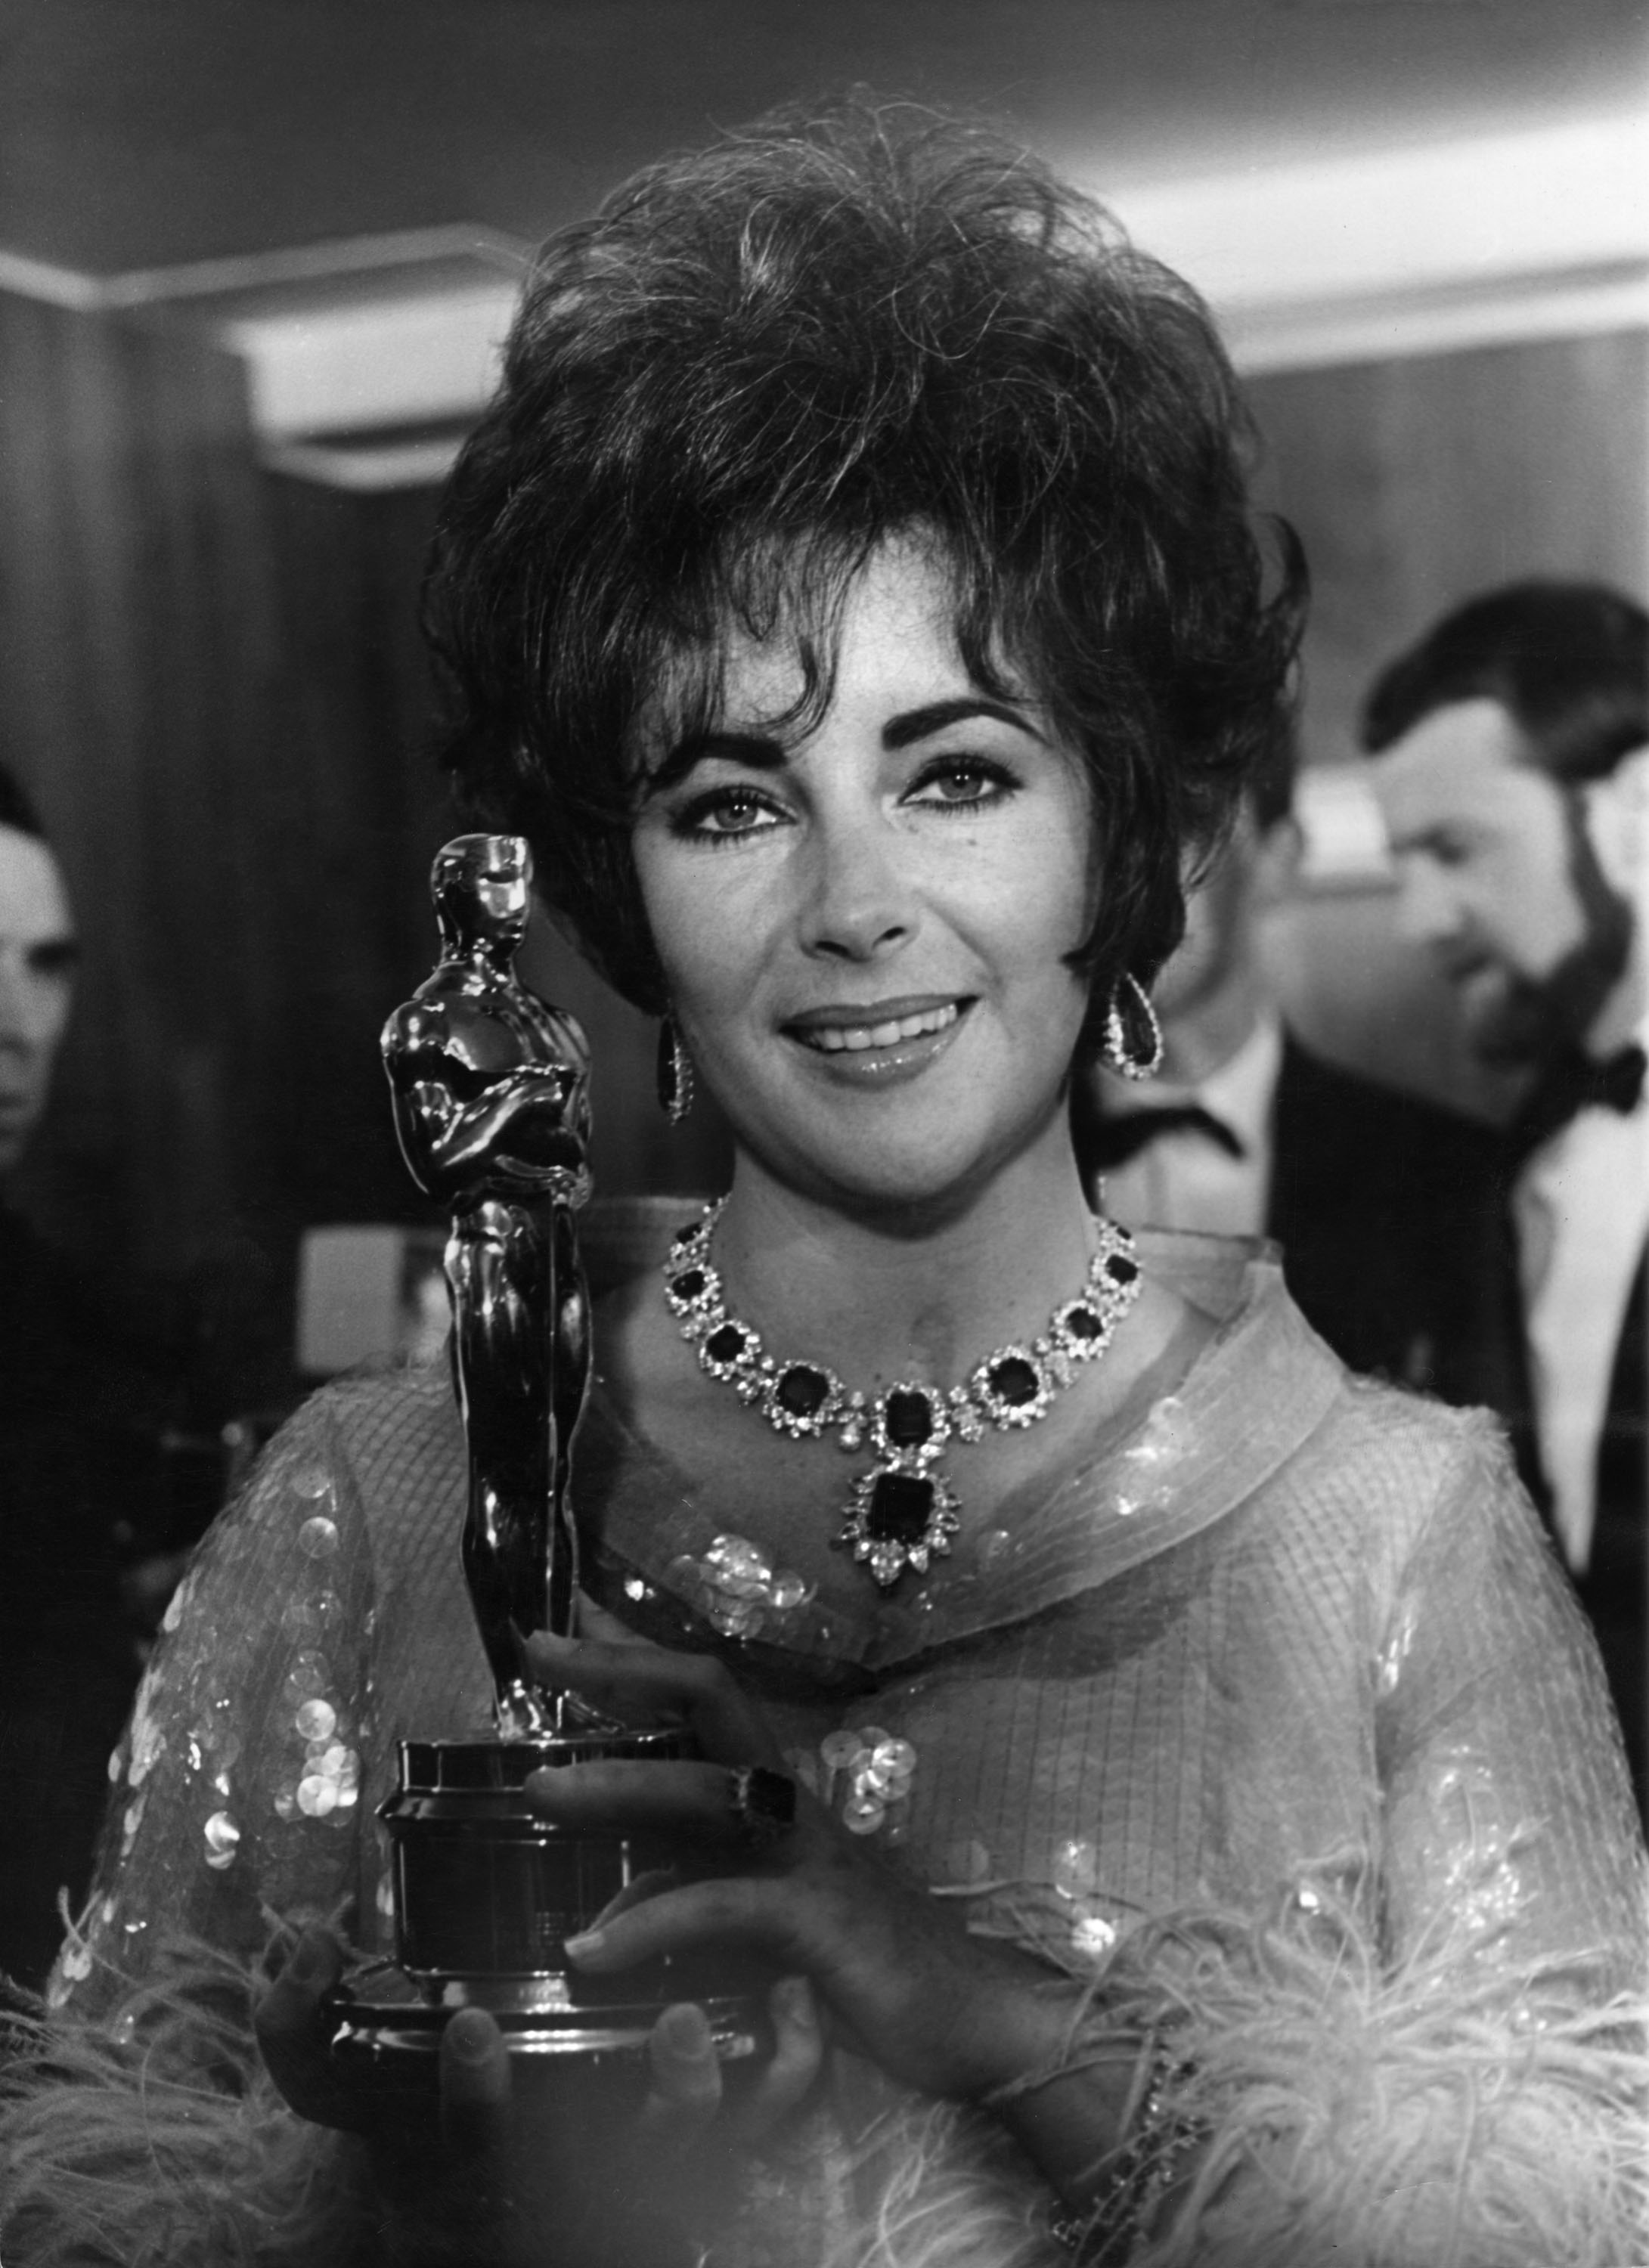 1967 | Oscars.org | Academy of Motion Picture Arts and Sciences2181 x 3000